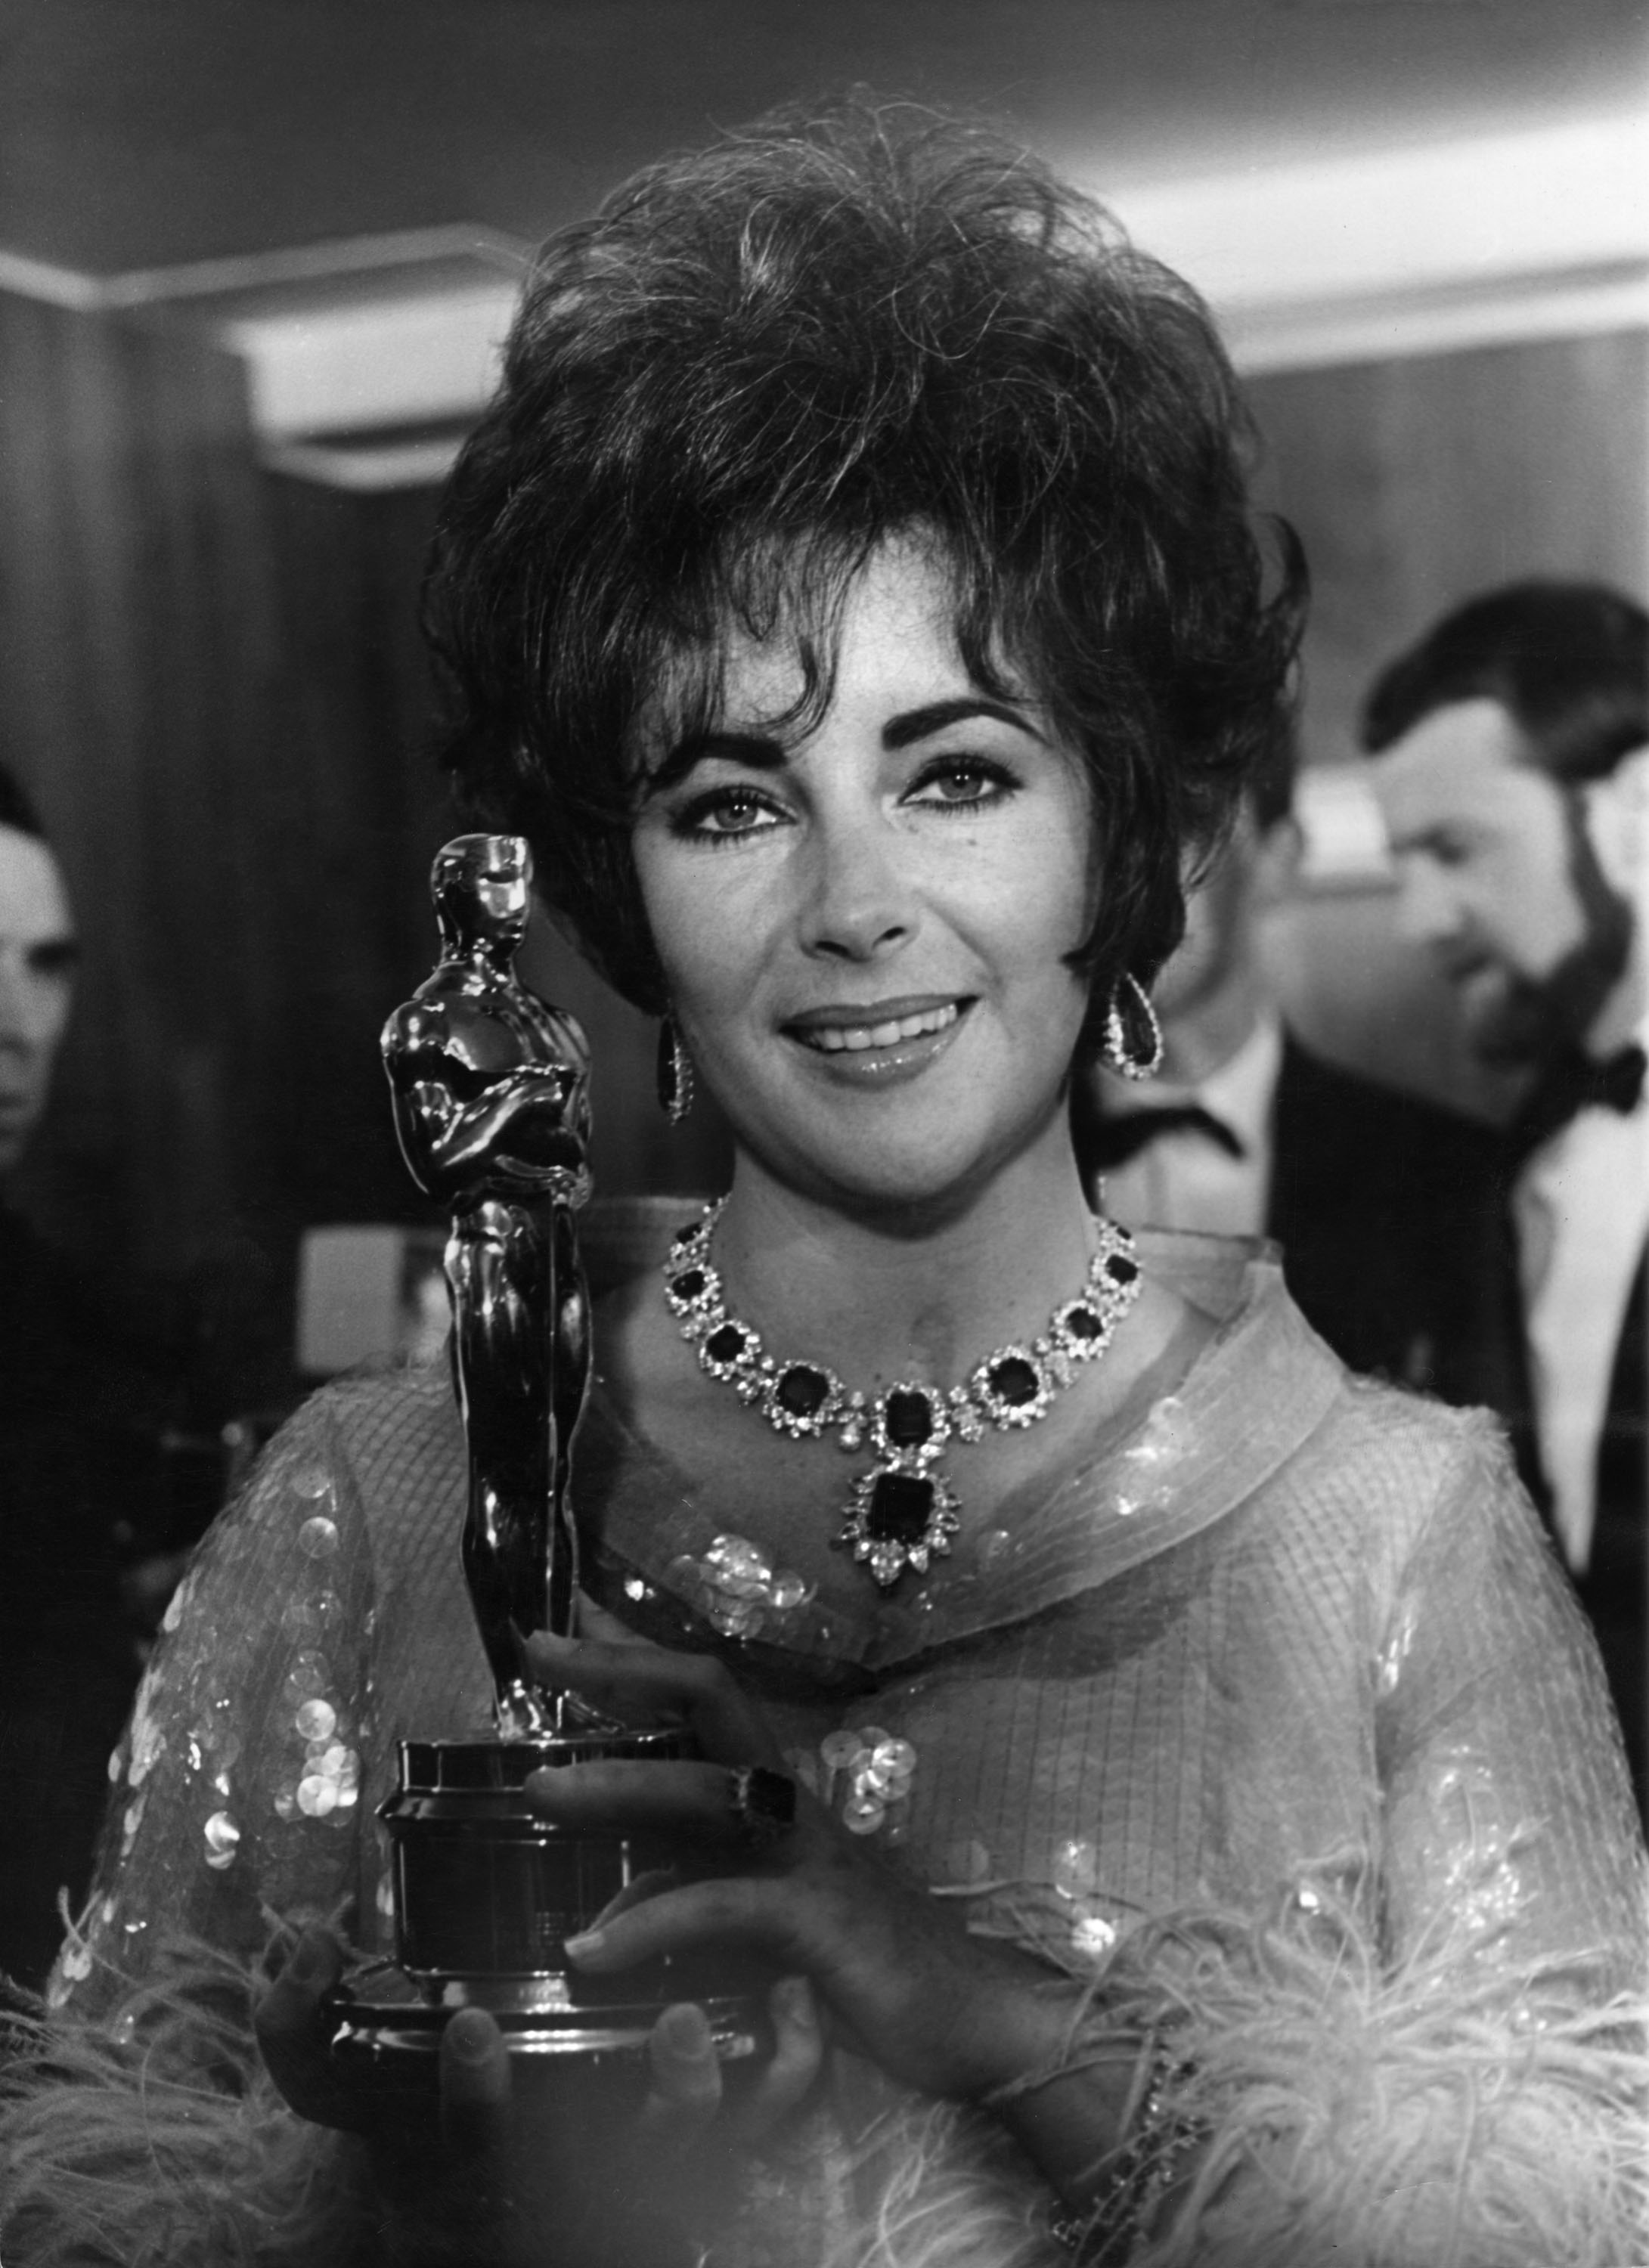 1967 | Oscars.org | Academy of Motion Picture Arts and Sciences2181 x 3000